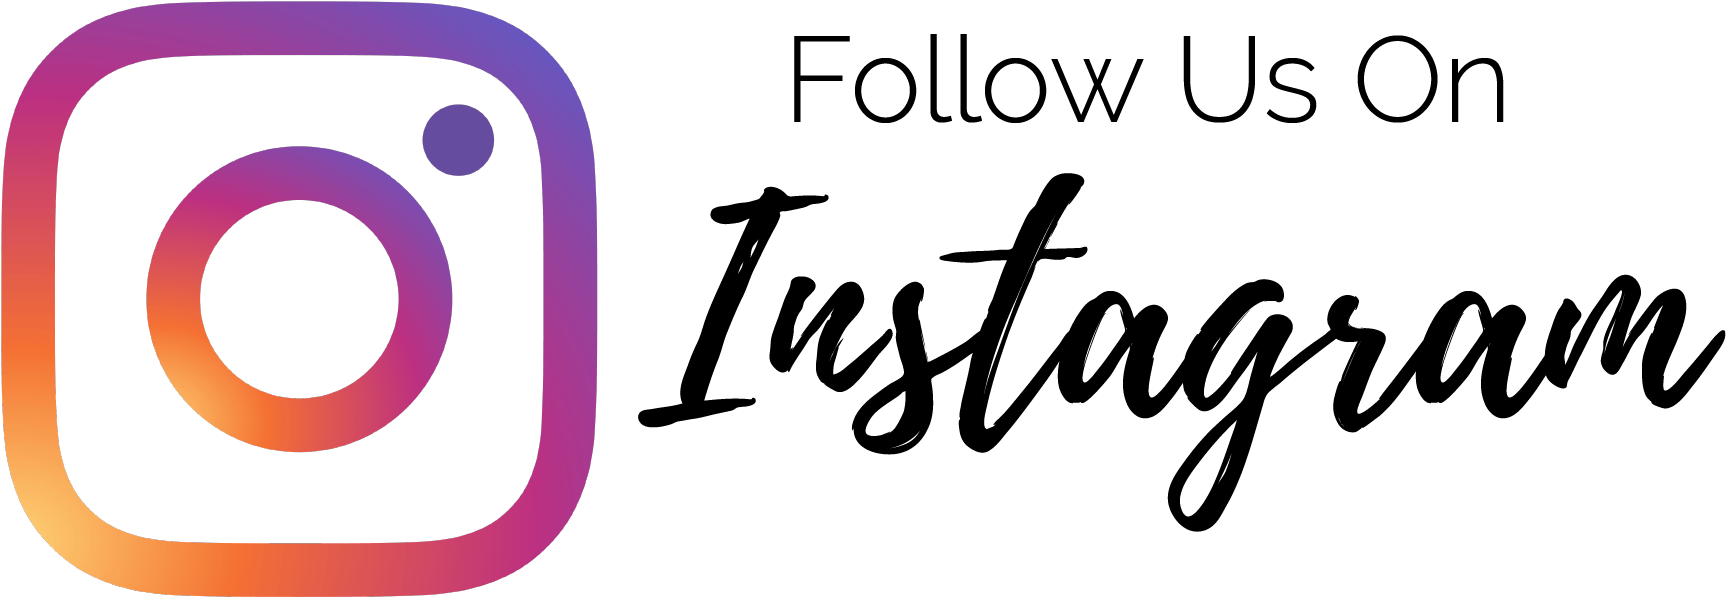 A logo for instagram that says `` follow us on instagram ''.